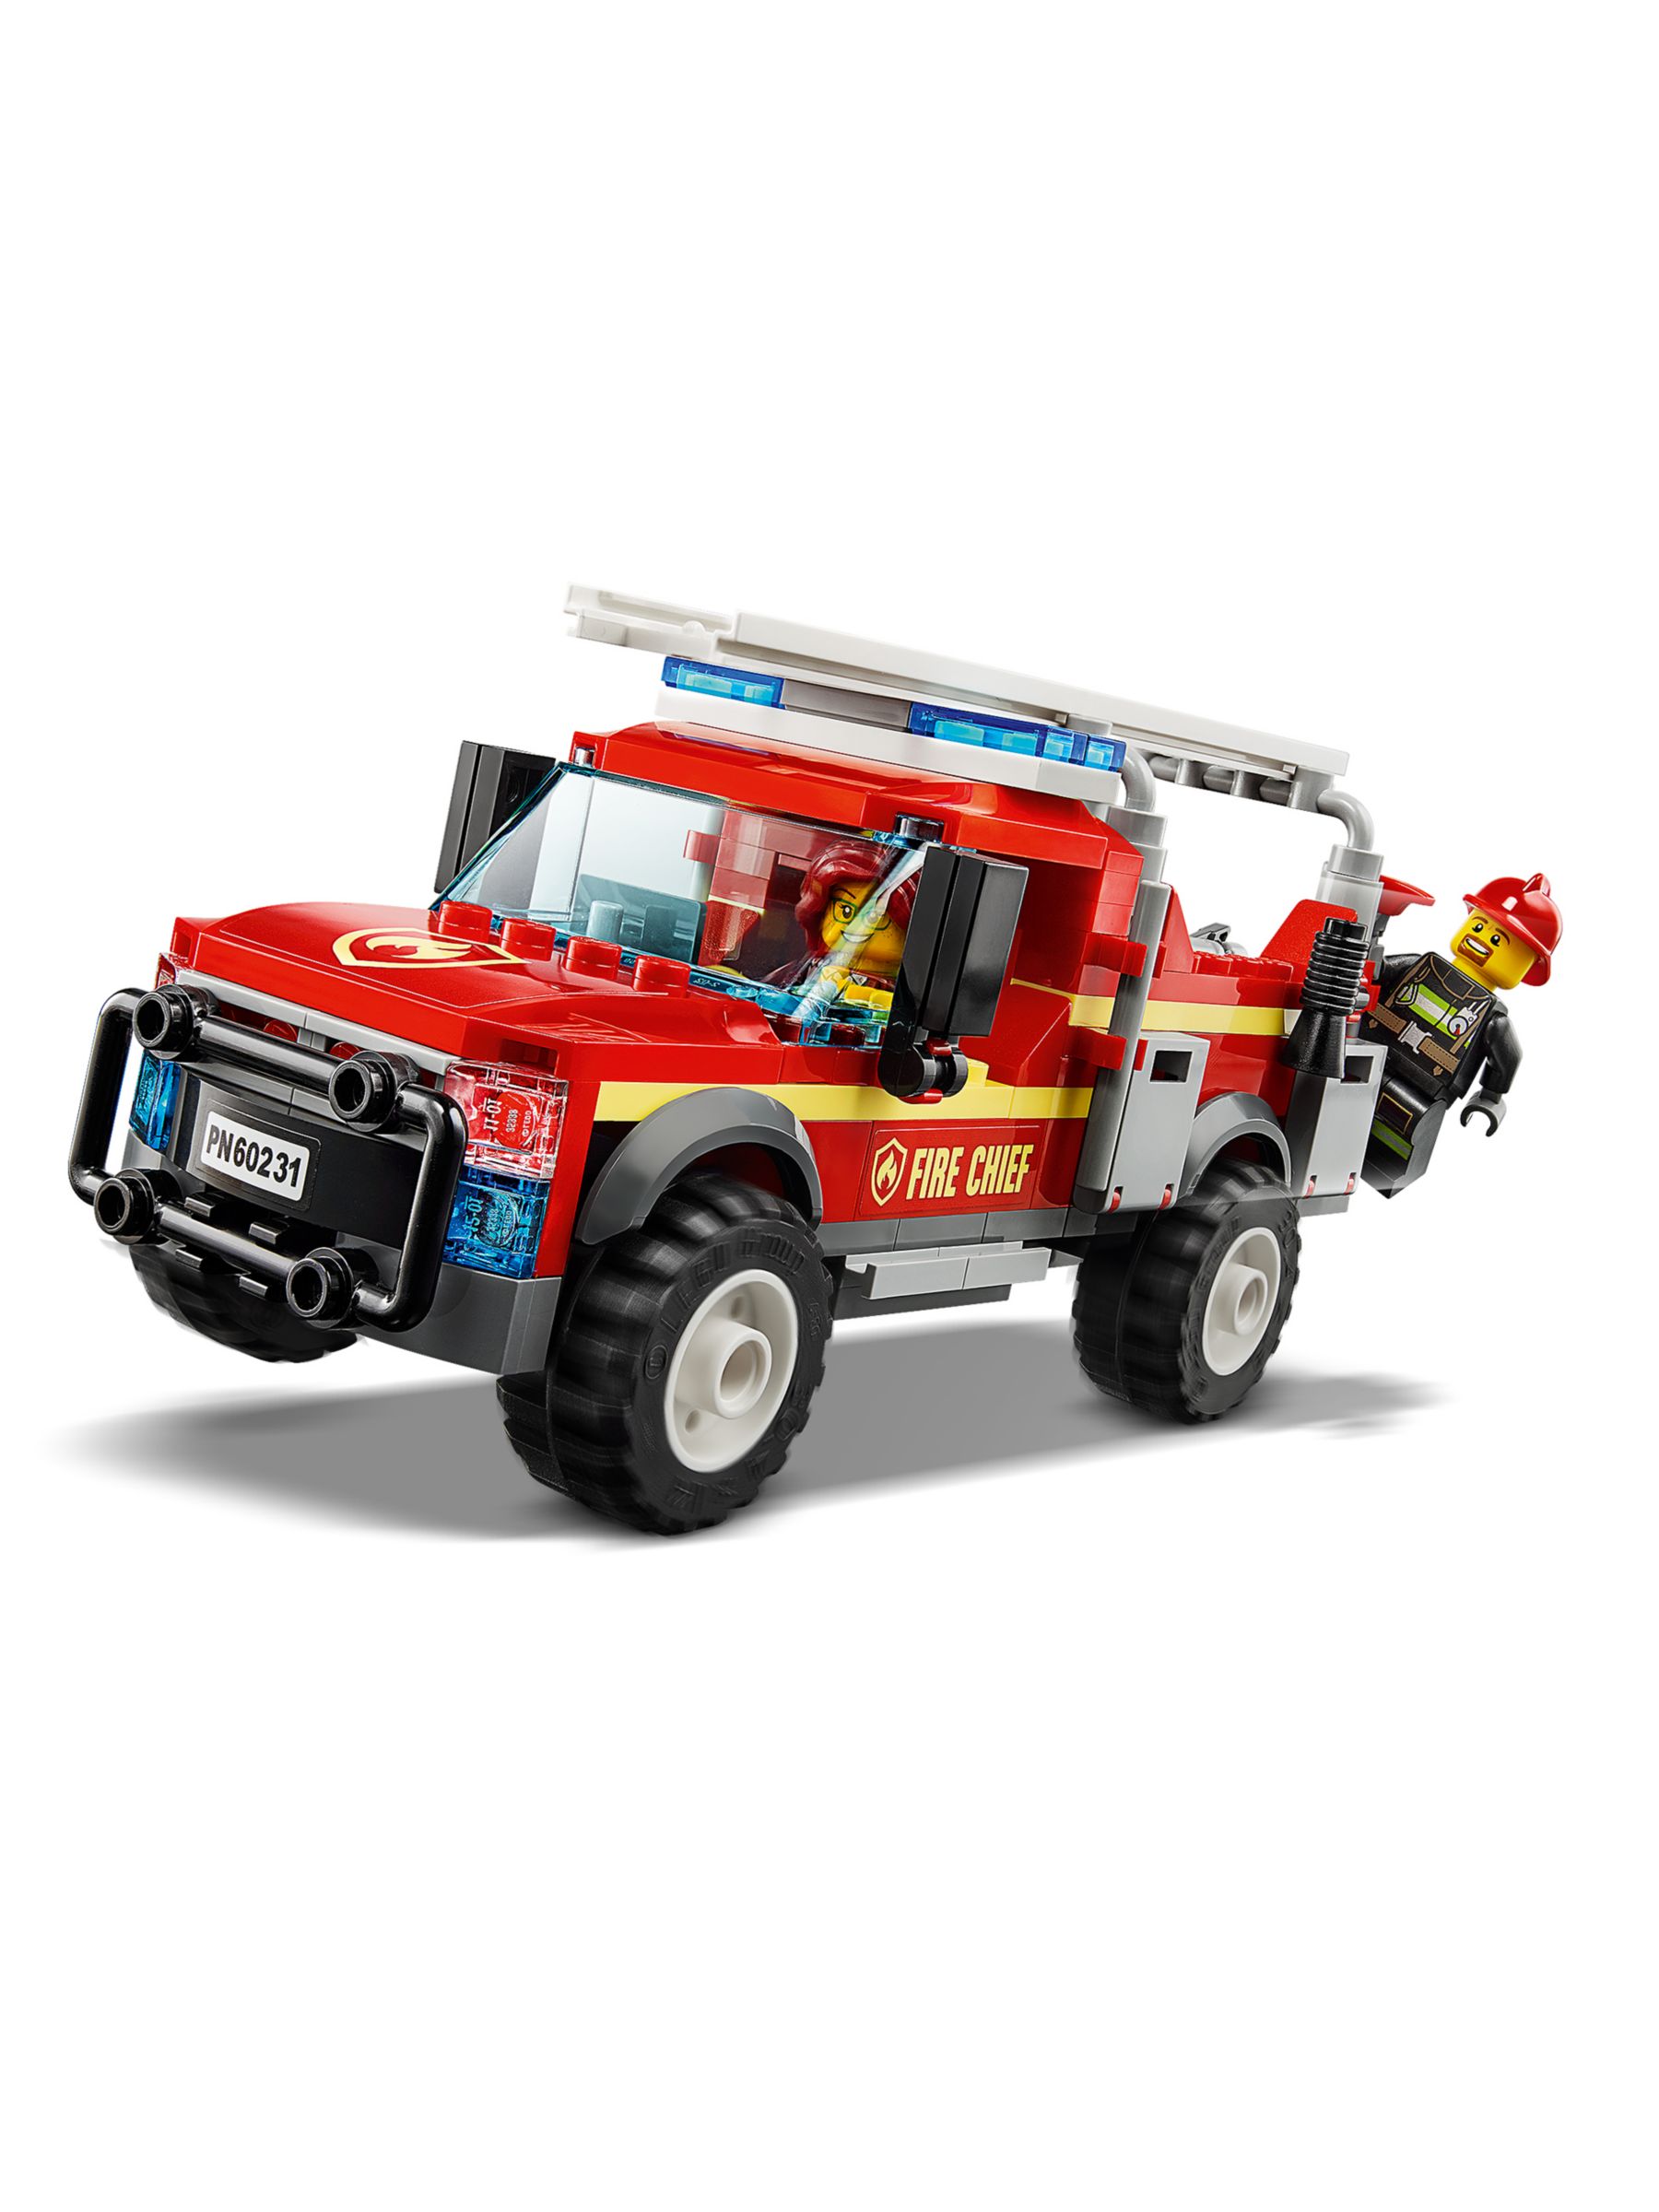 fire chief response truck lego